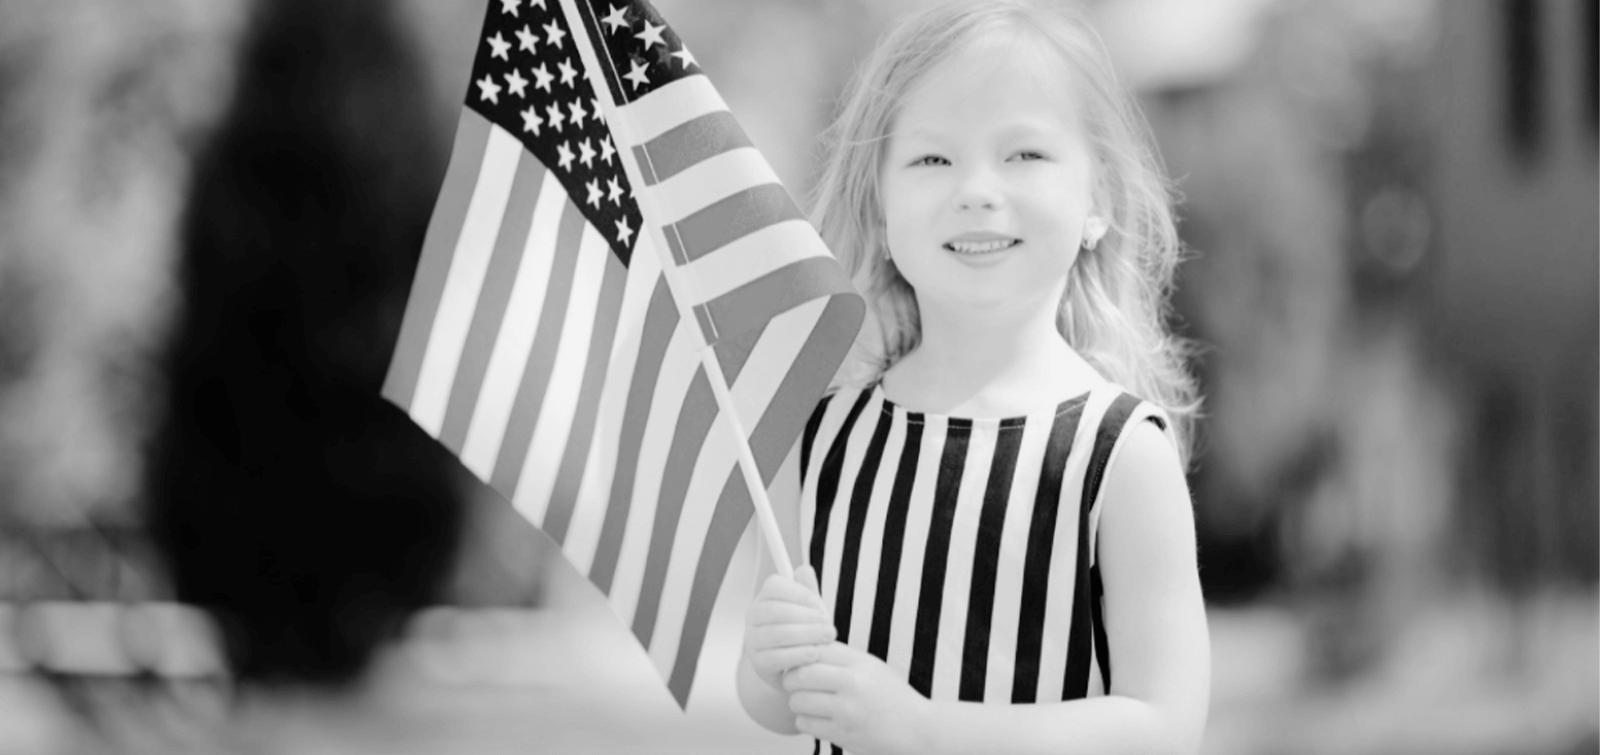 a young girl holds an American flag in her hands